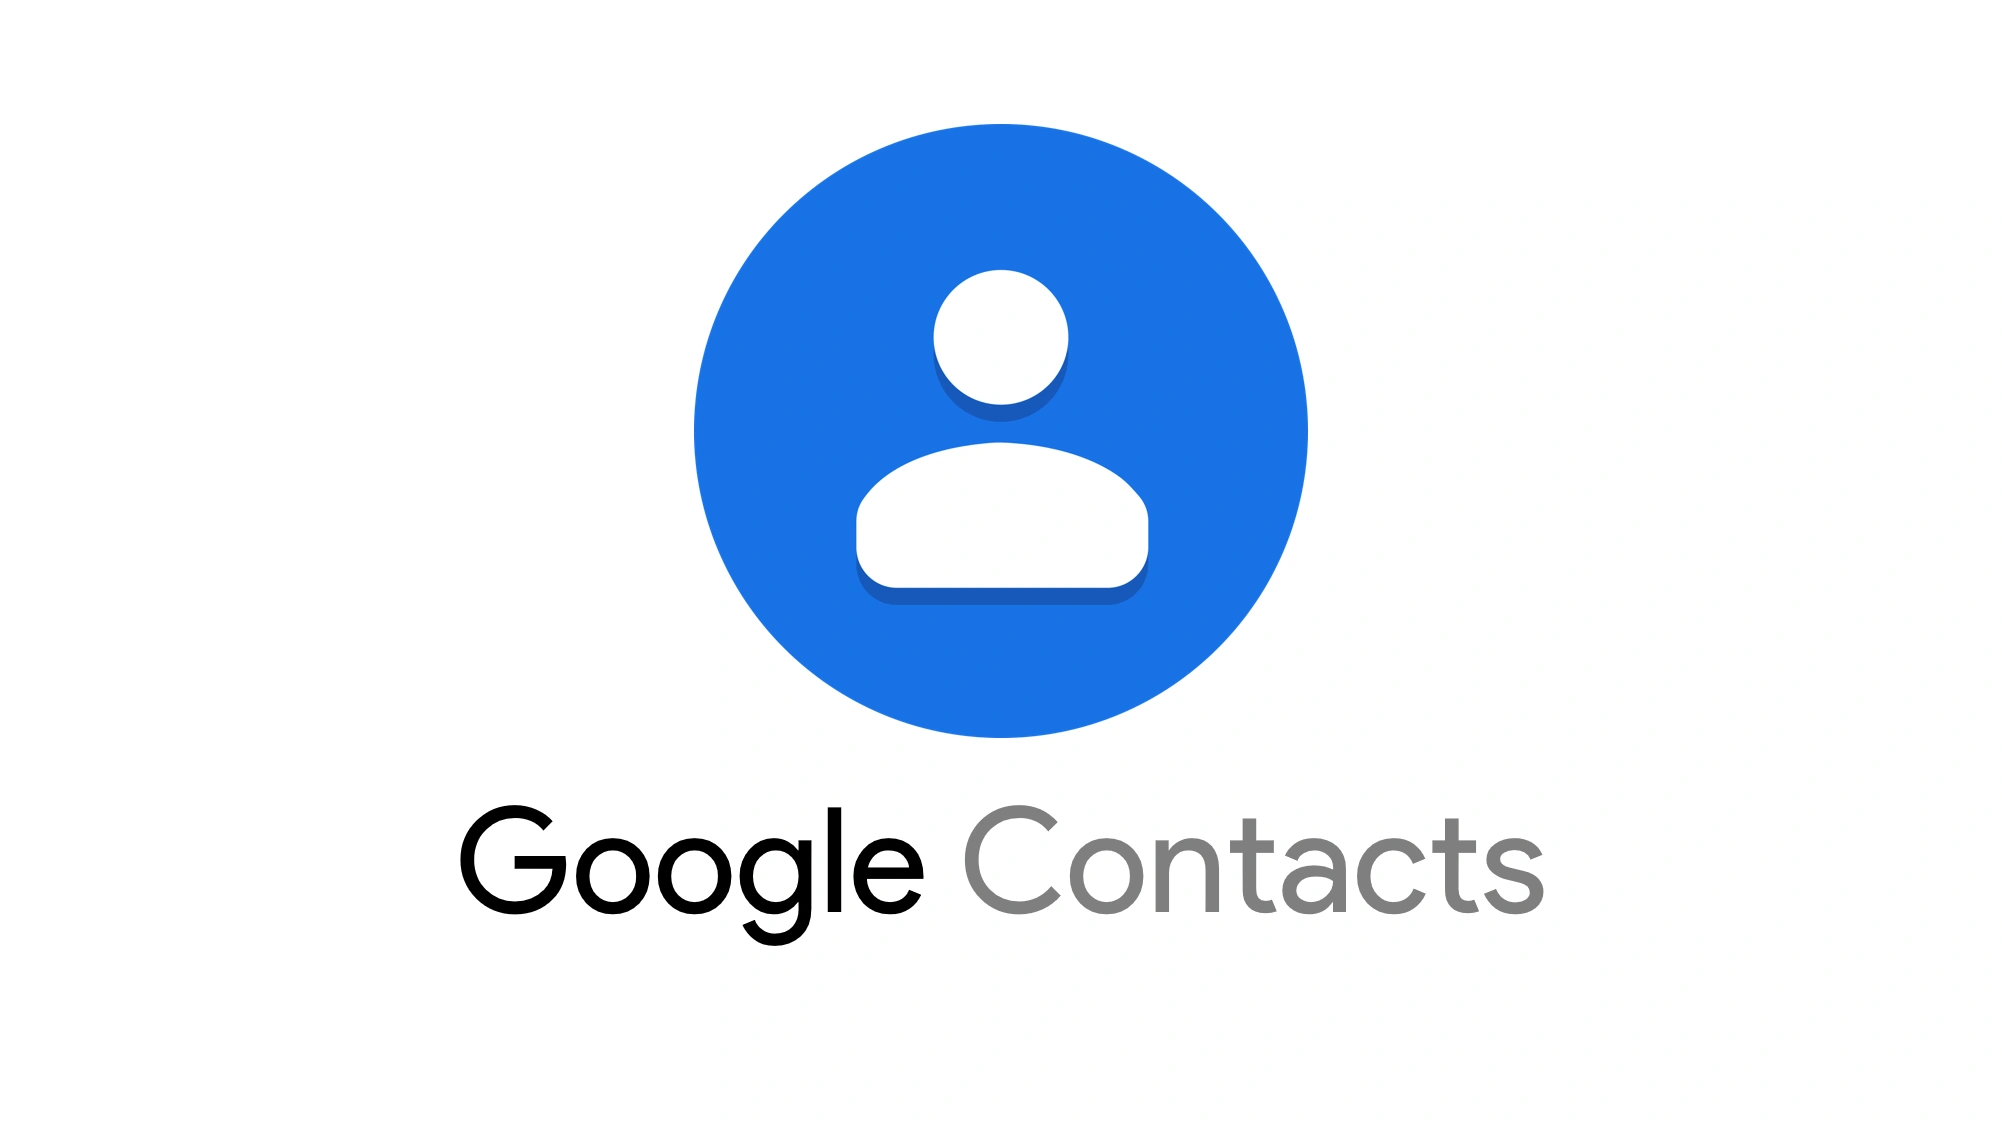 How to restore your Google Contacts featured image